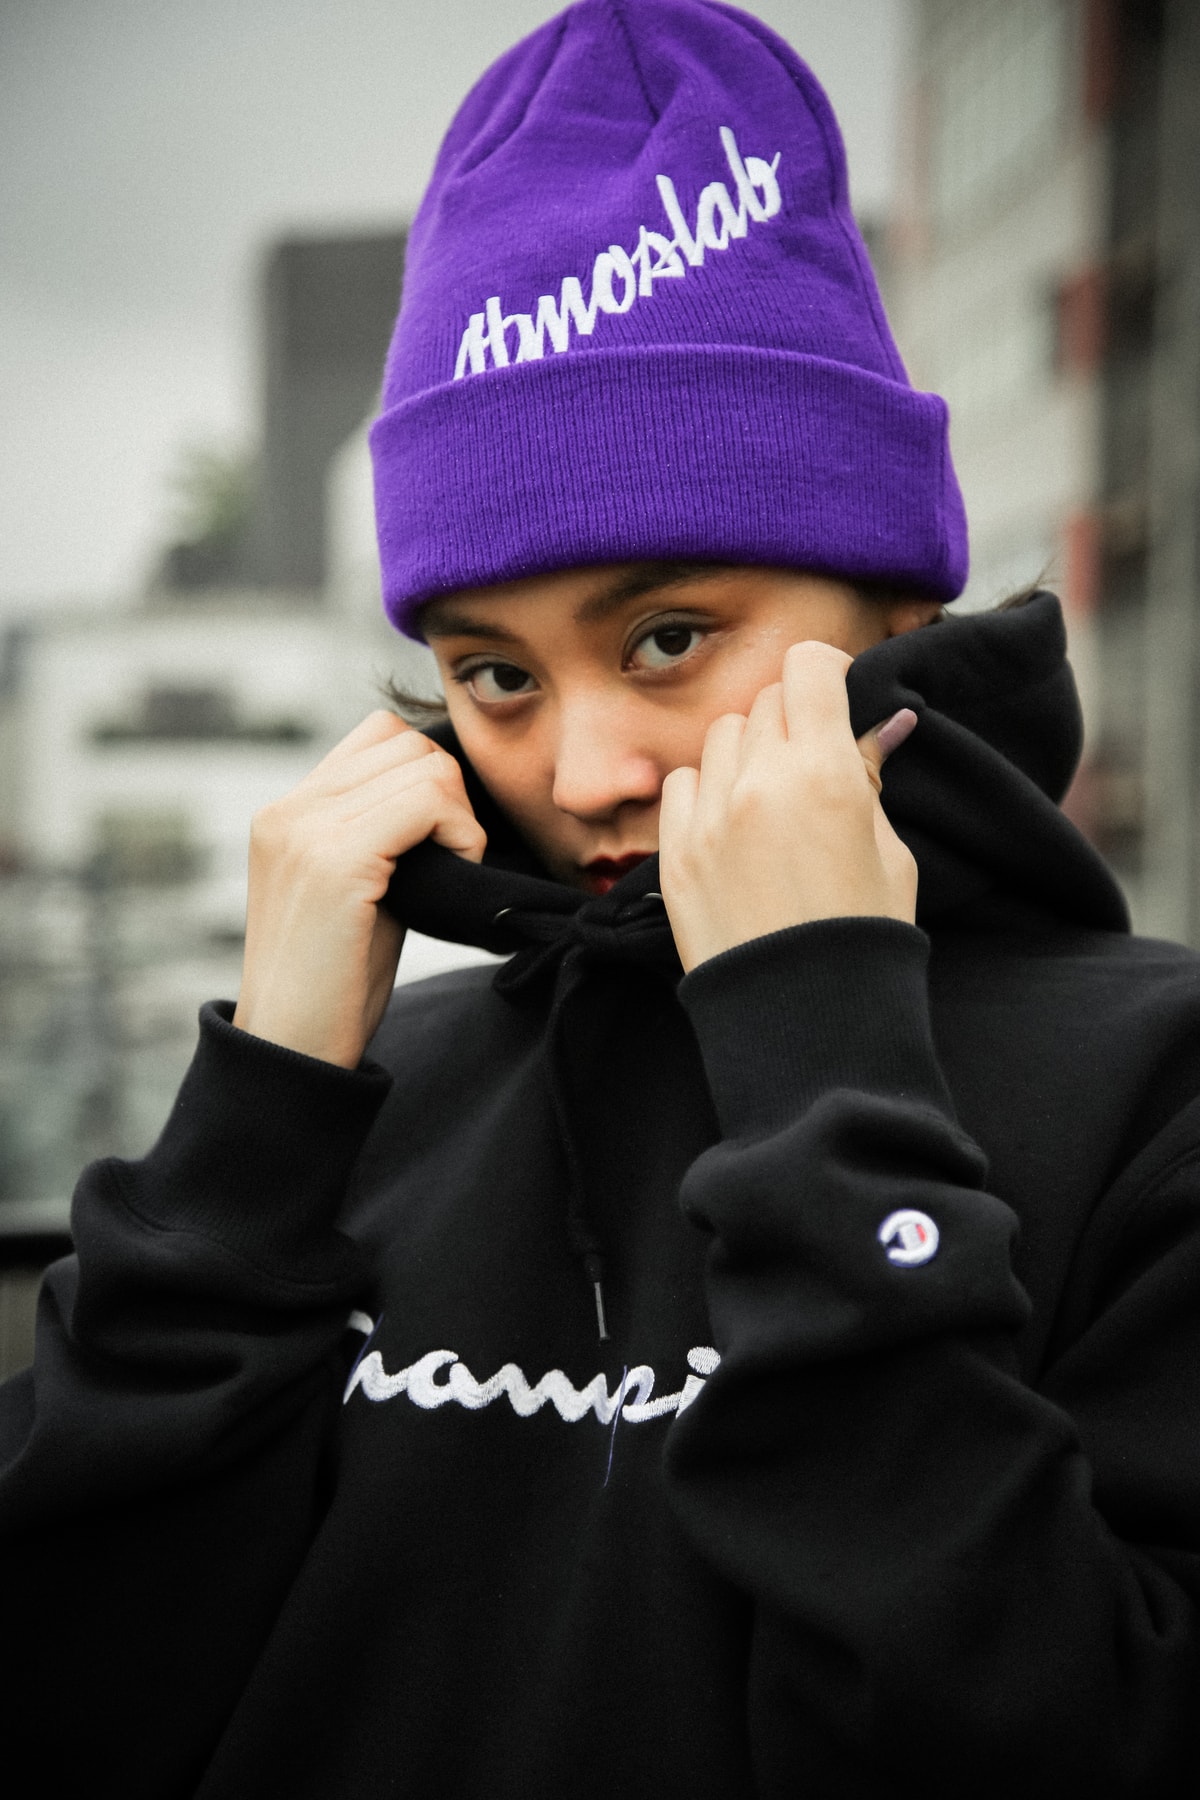 atmos LAB Champion Fall Winter 2018 Collab august 11 2018 drop release lookbook drop release date info hoodie tee shirt hat beanine